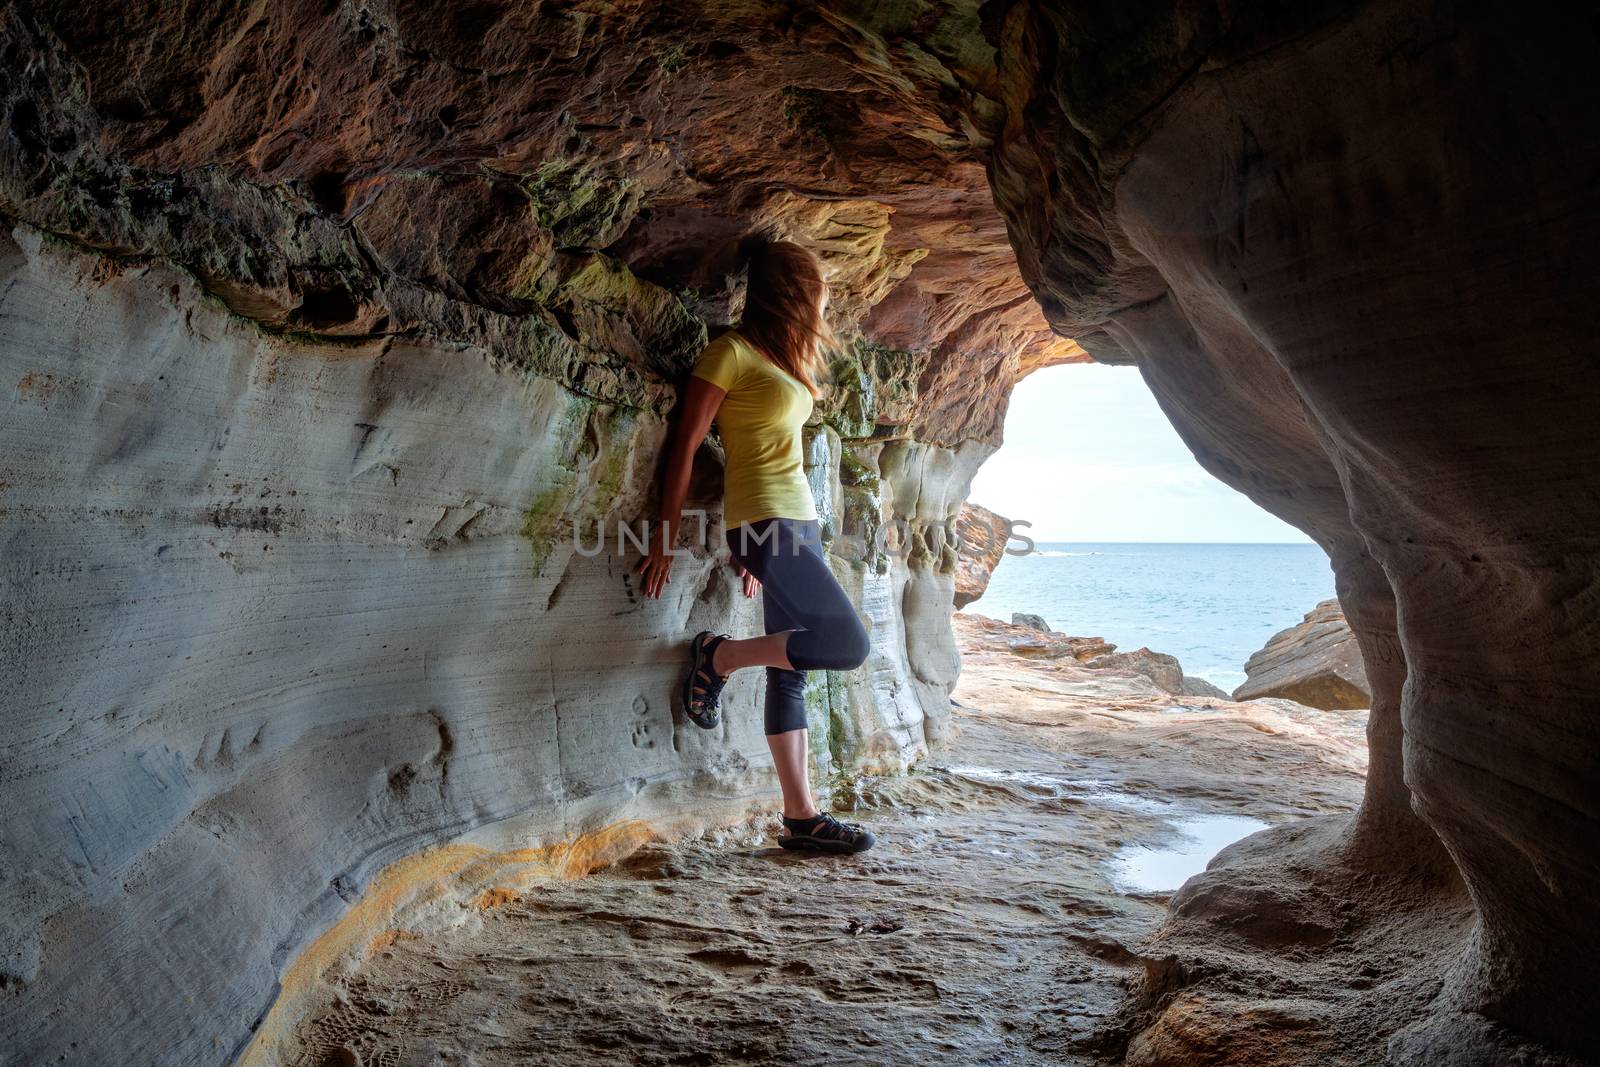 A woman stands in a carved out tunnel that leads to a rock ledge overlooking the ocean